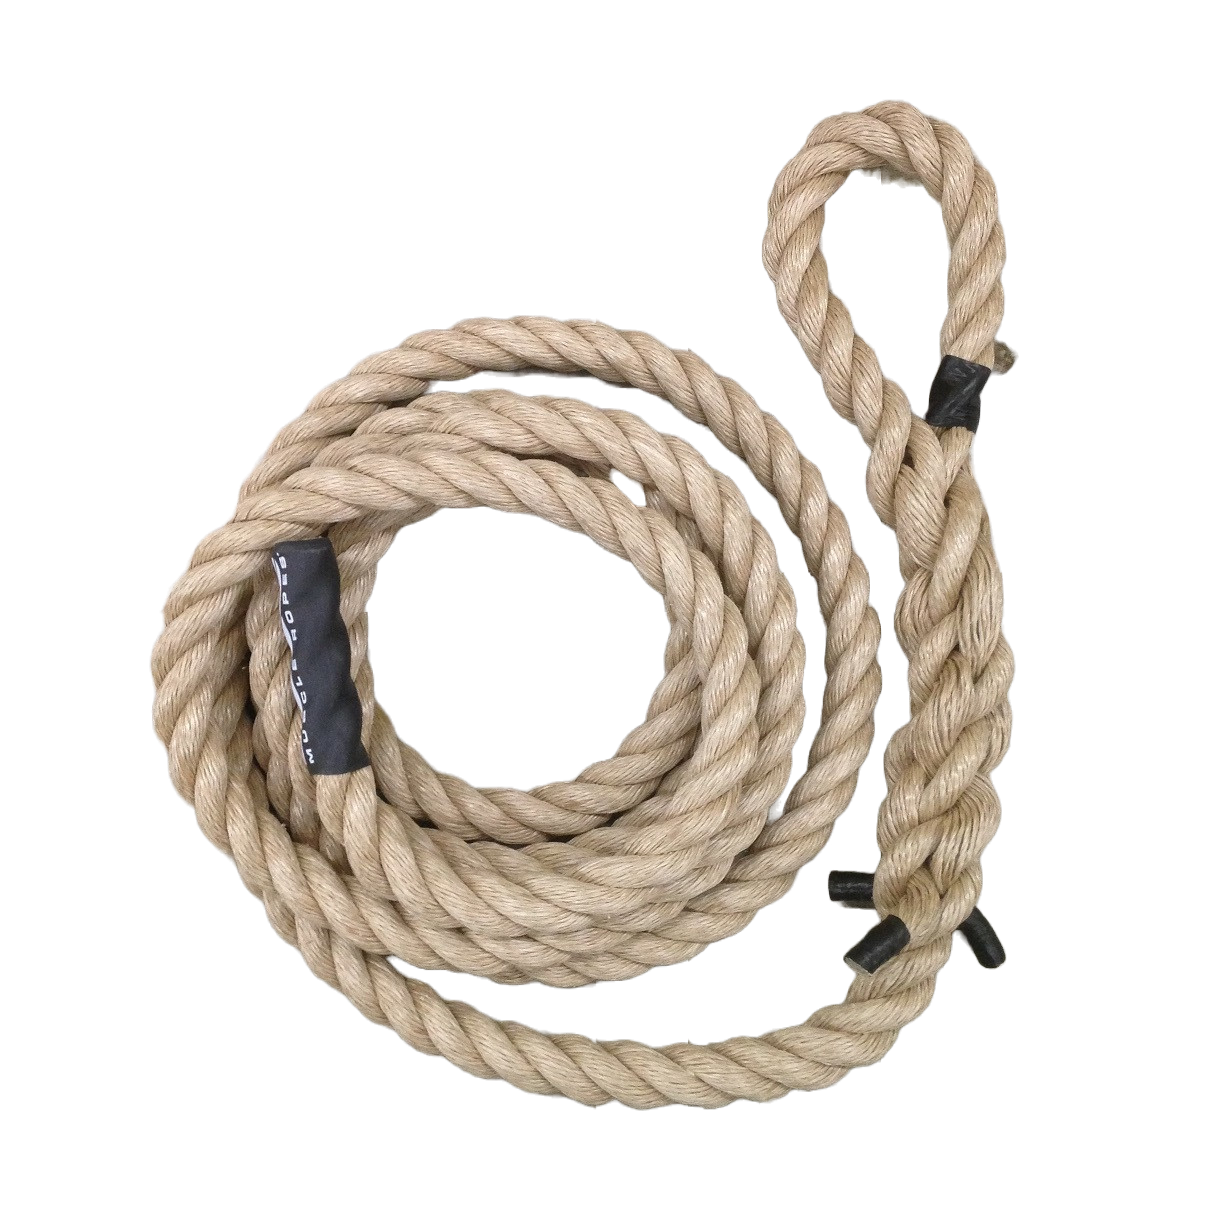 OCR Climbing Exercise Rope